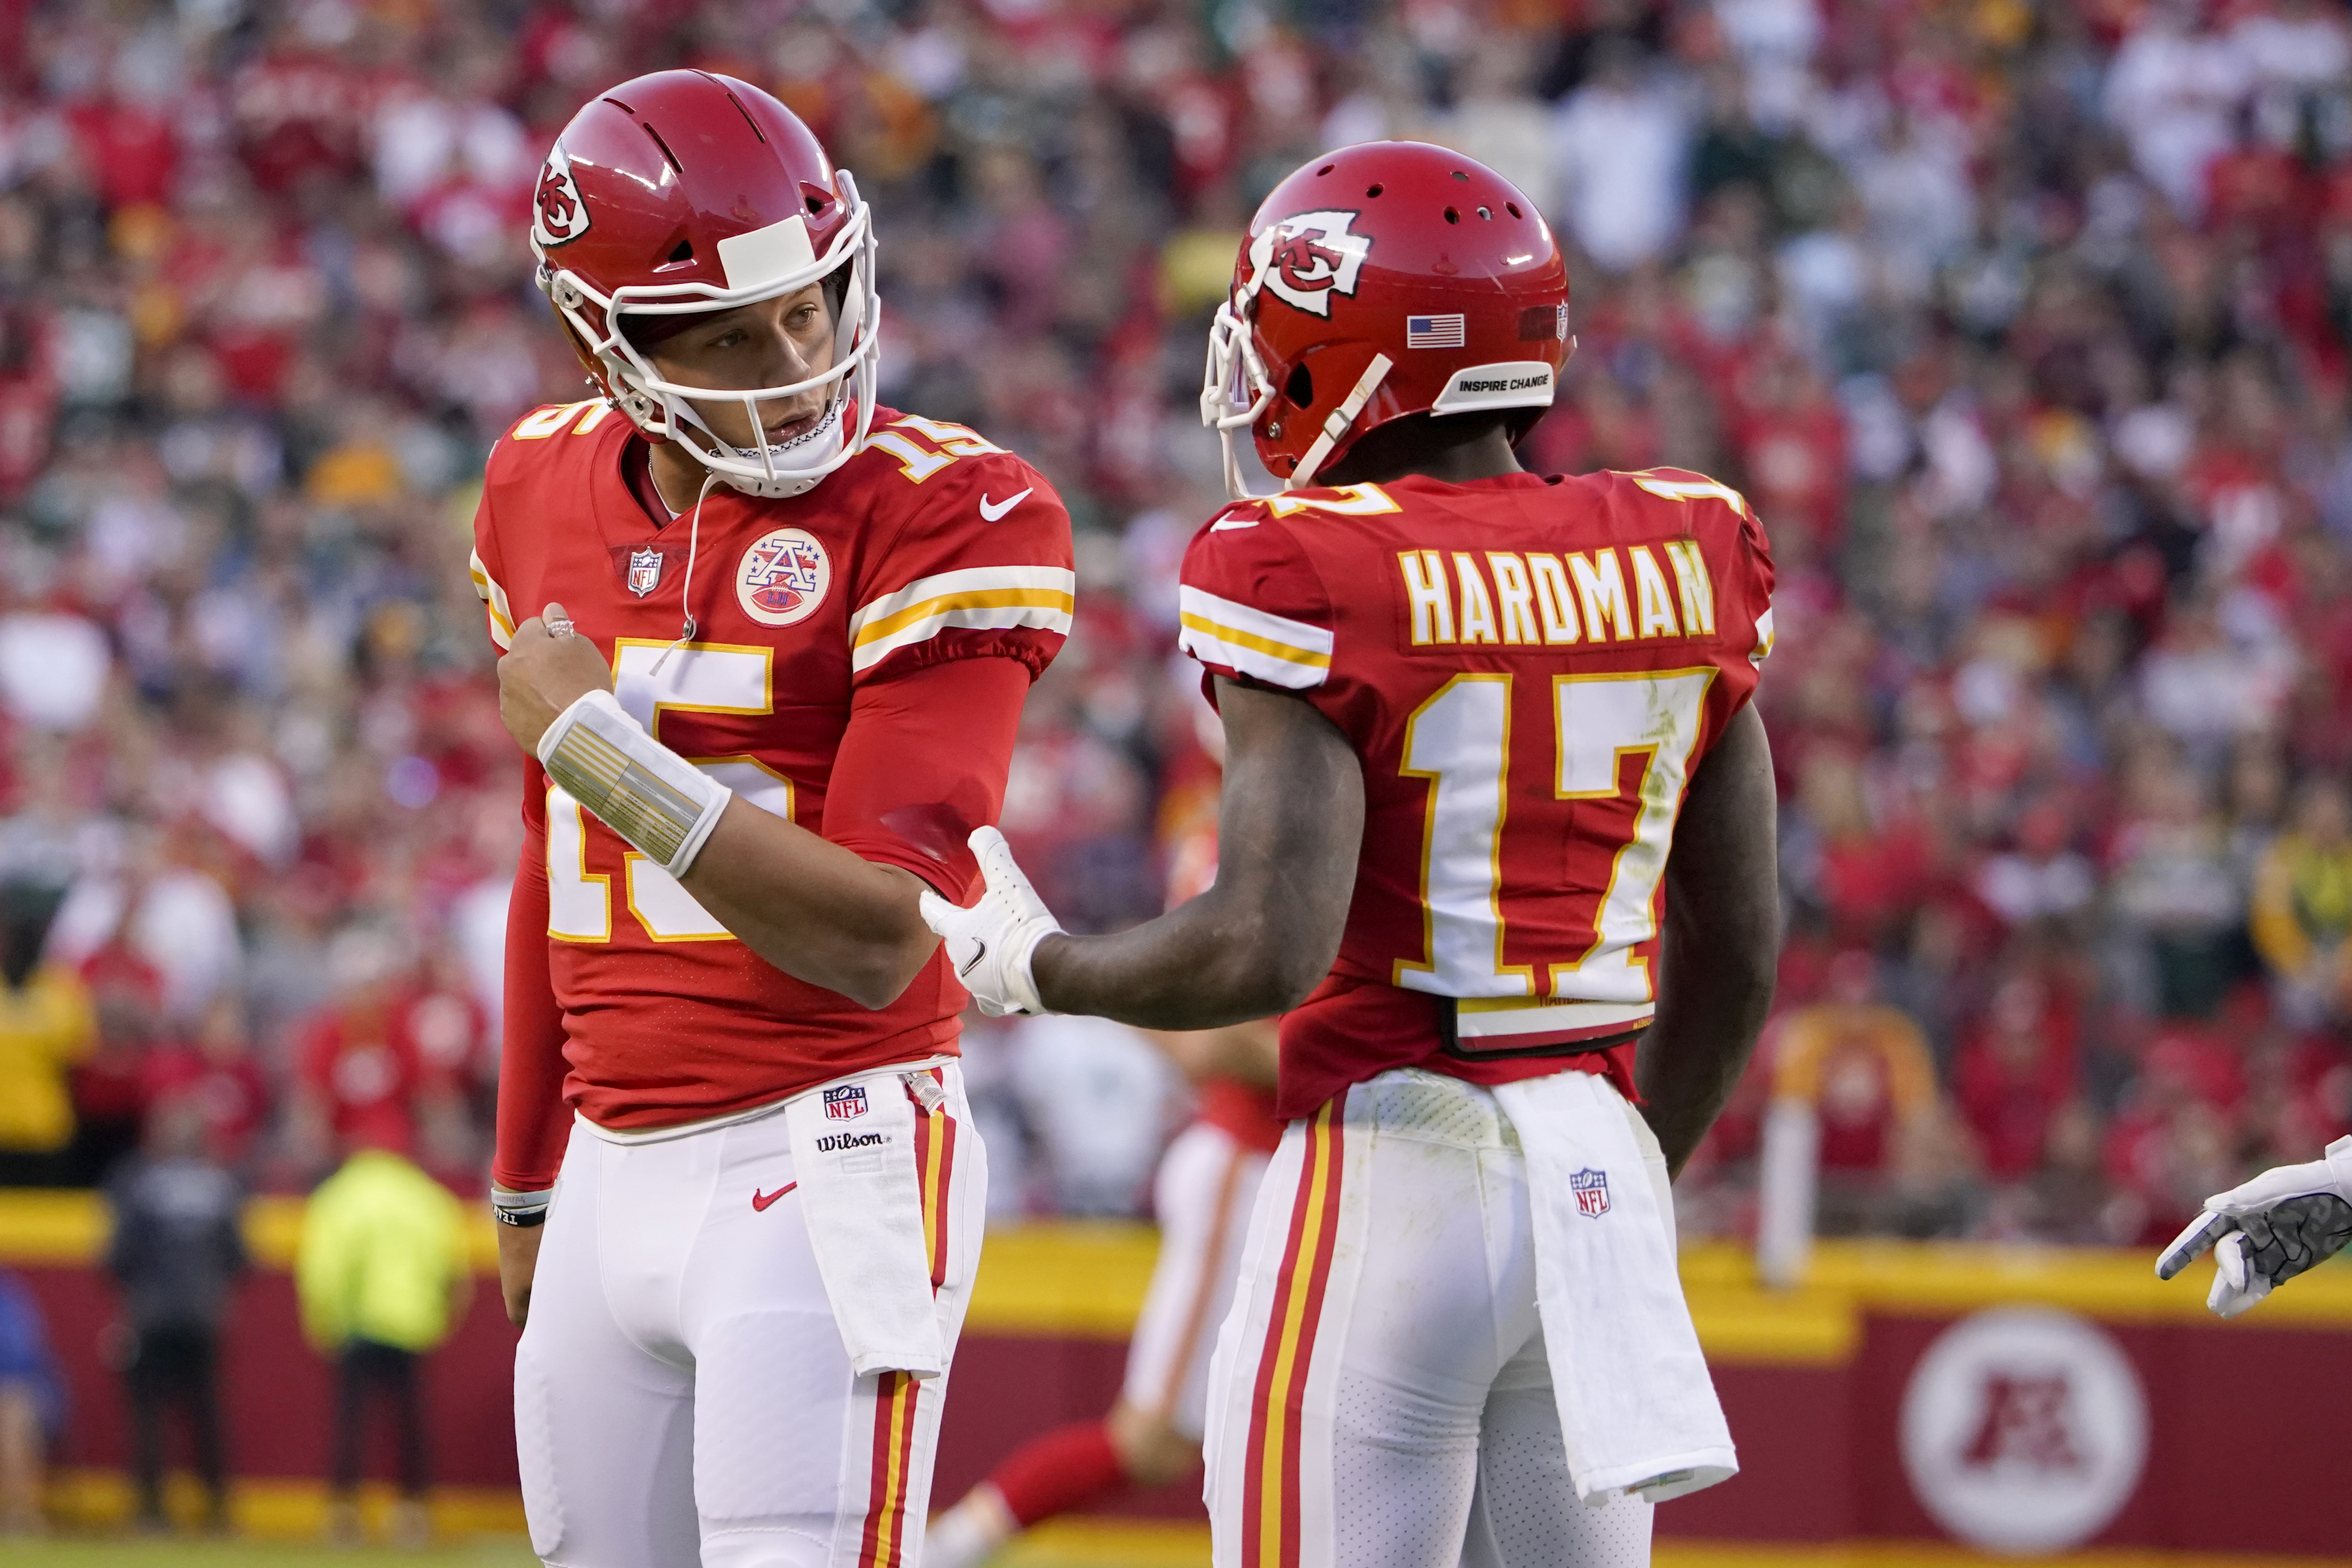 Hersmiles.co on X:  Patrick Mahomes And